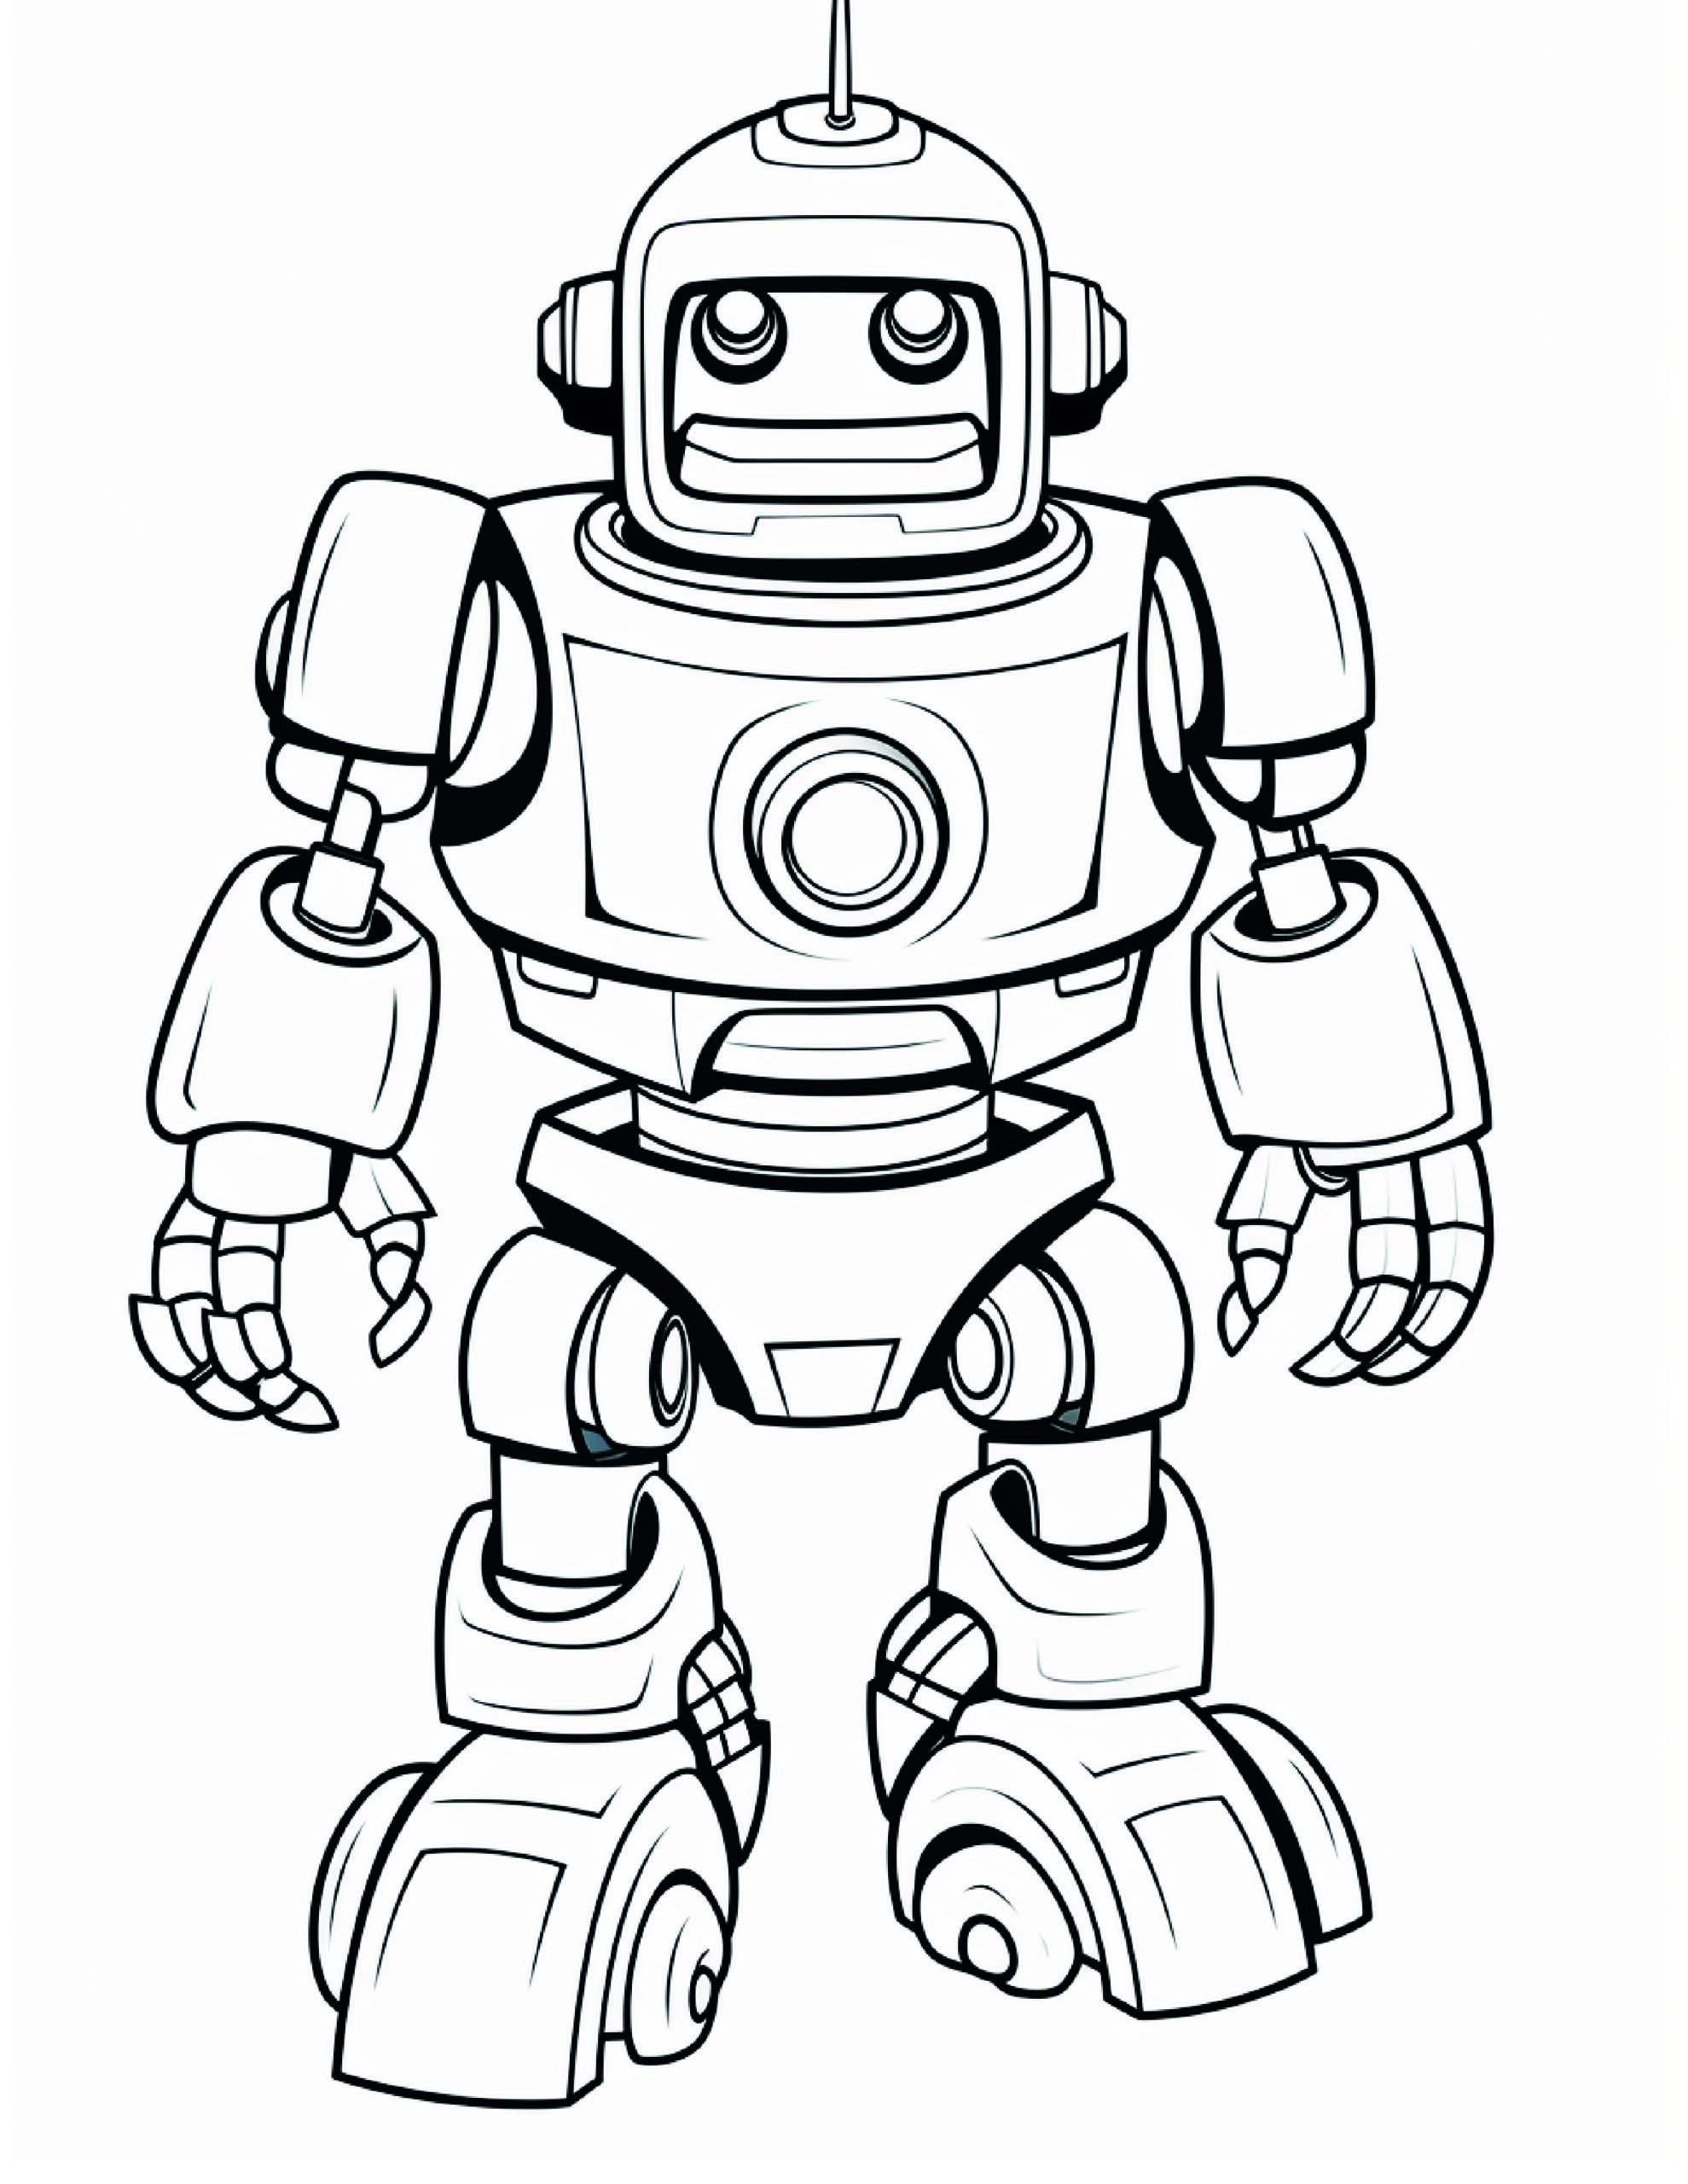 Robot Coloring Page 18 - A line drawing of an amazing robot. 